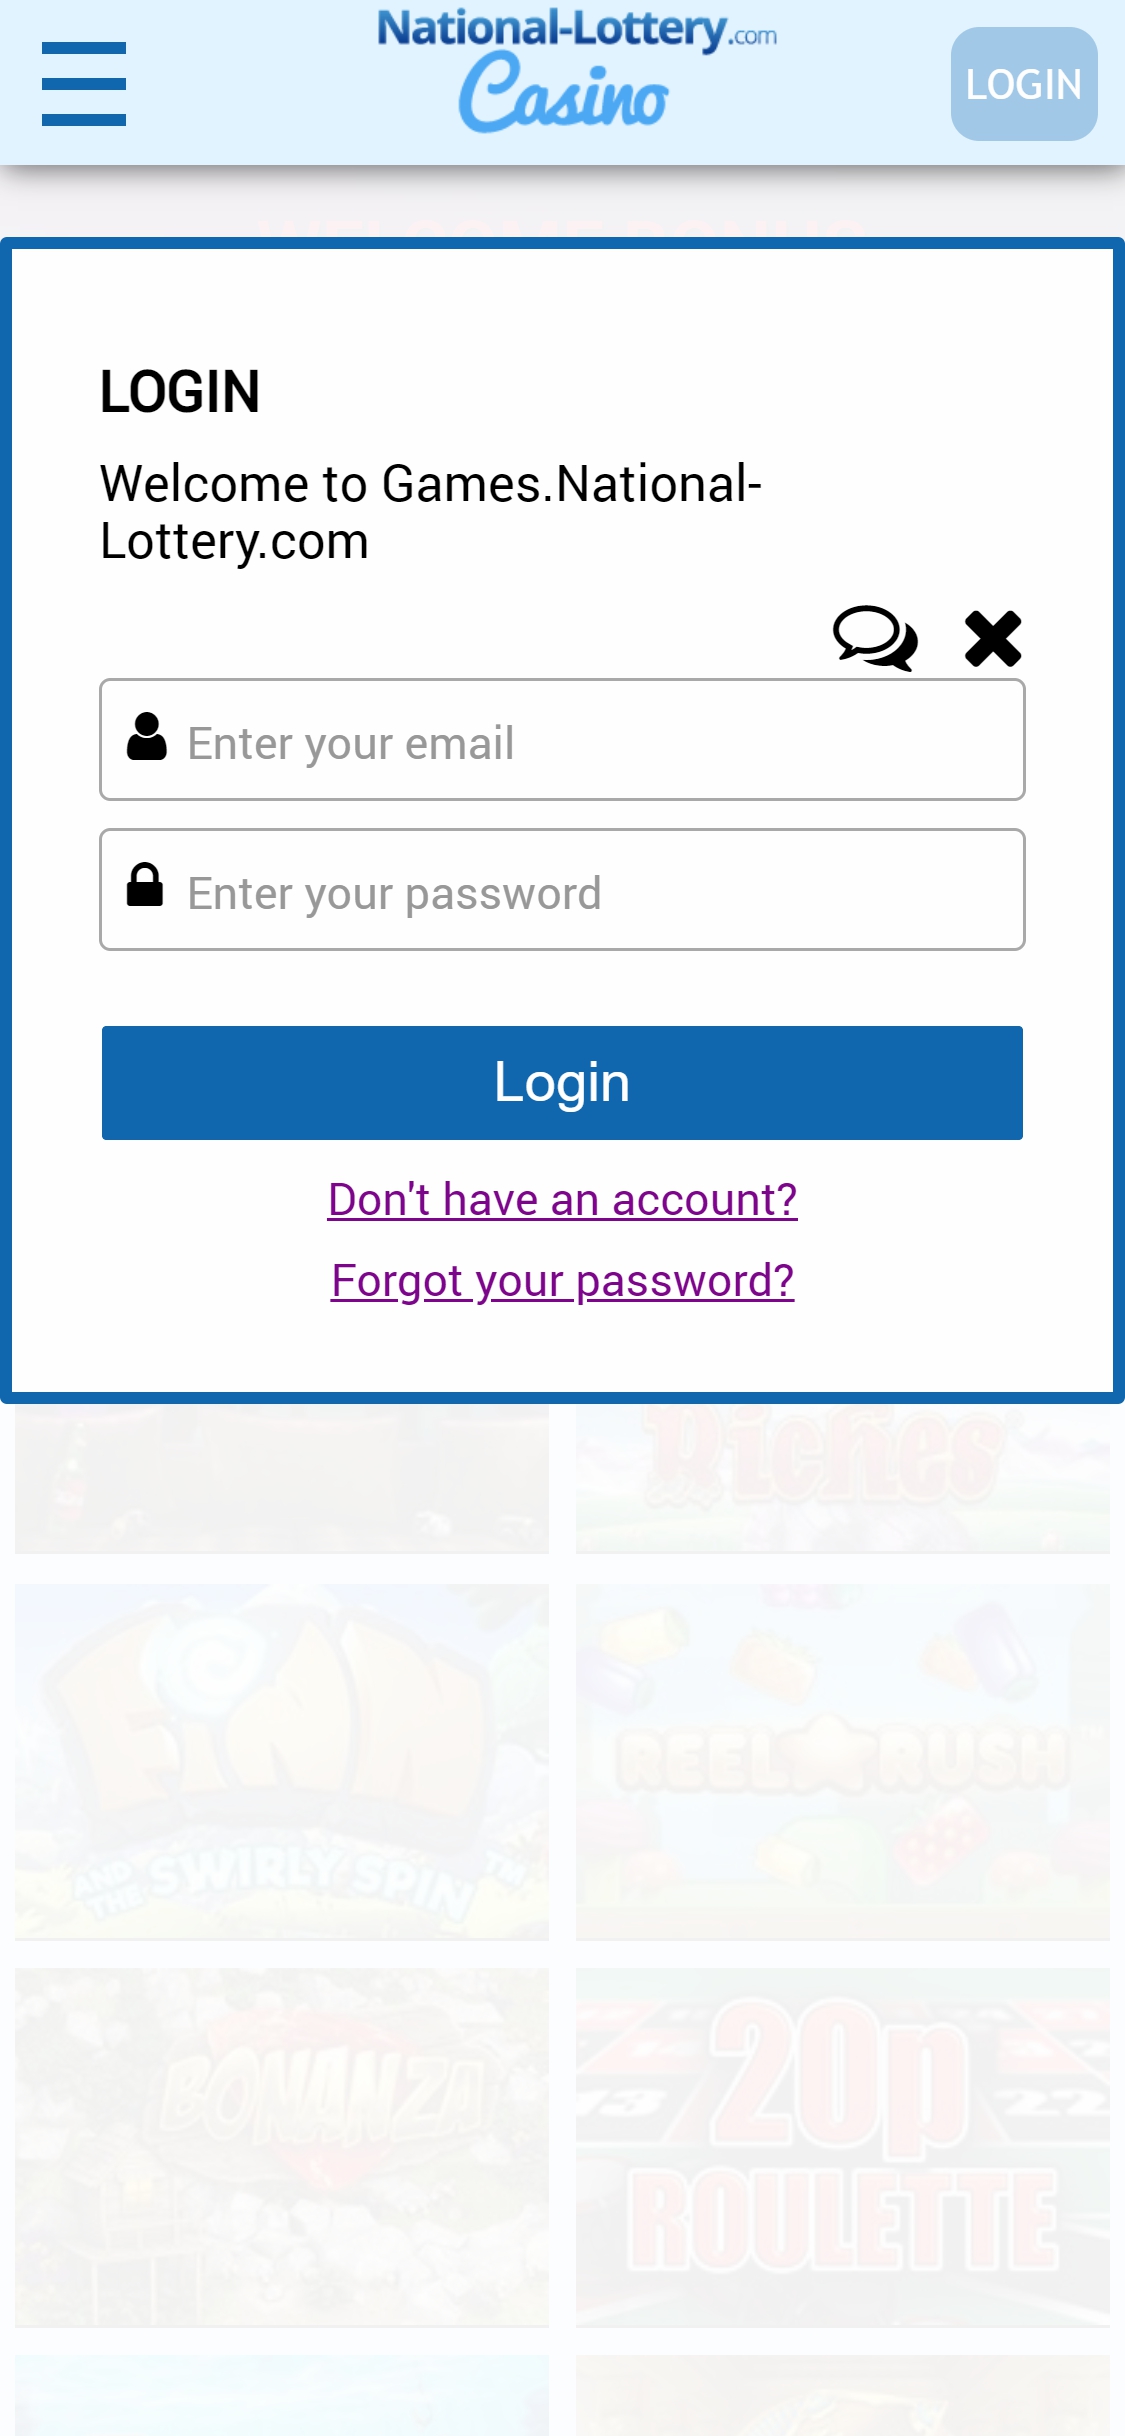 National Lottery Casino Mobile Login Review